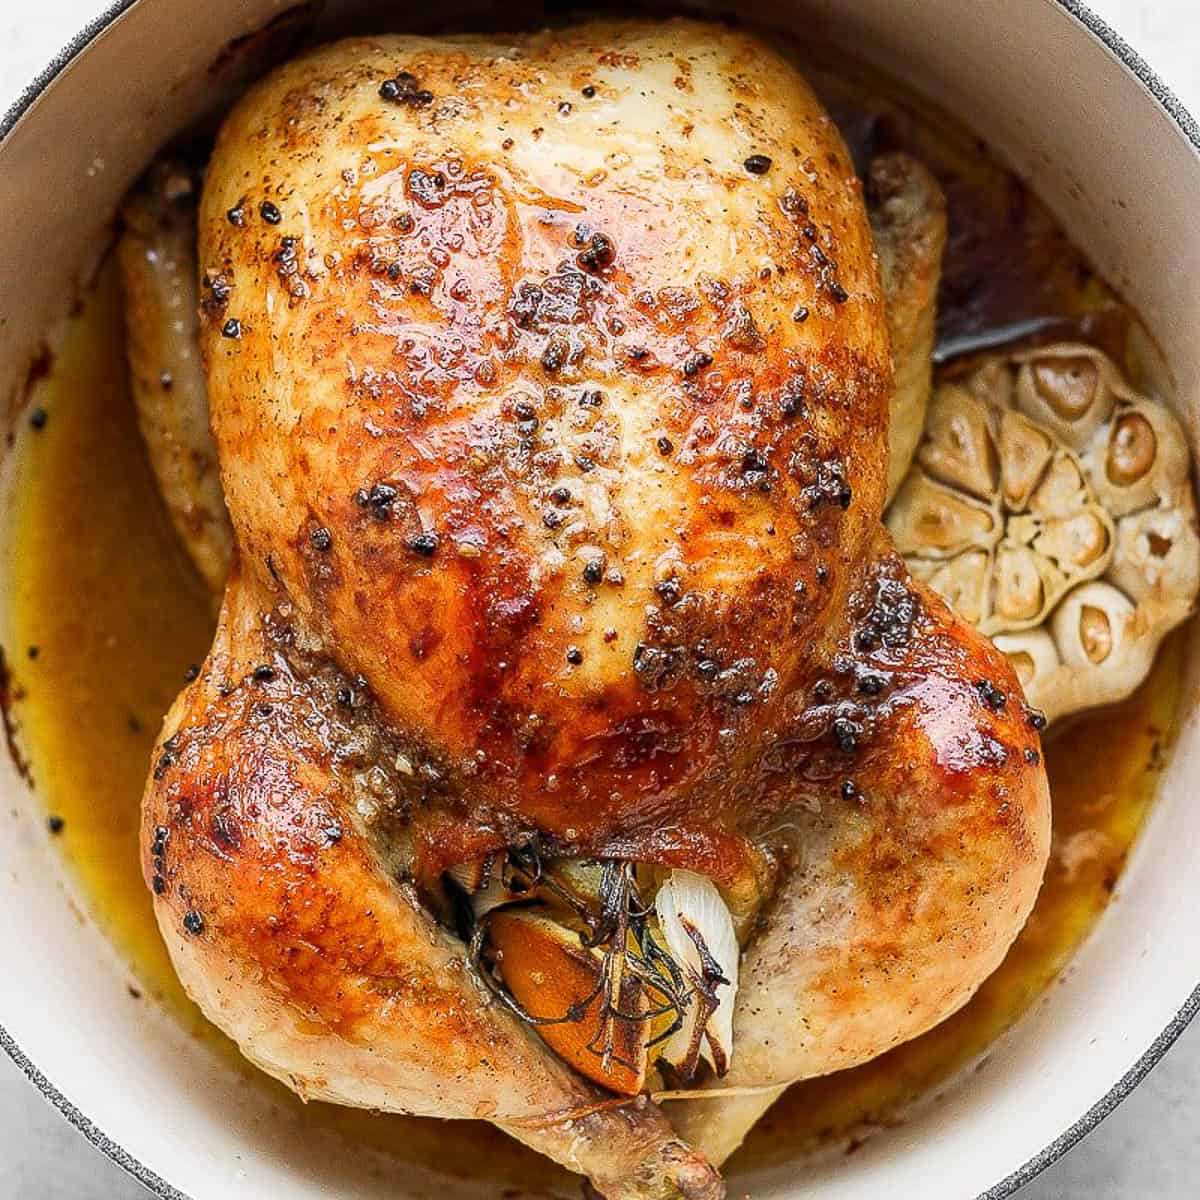 Top shot of a whole roasted chicken in a Dutch oven with a head of garlic next to it.